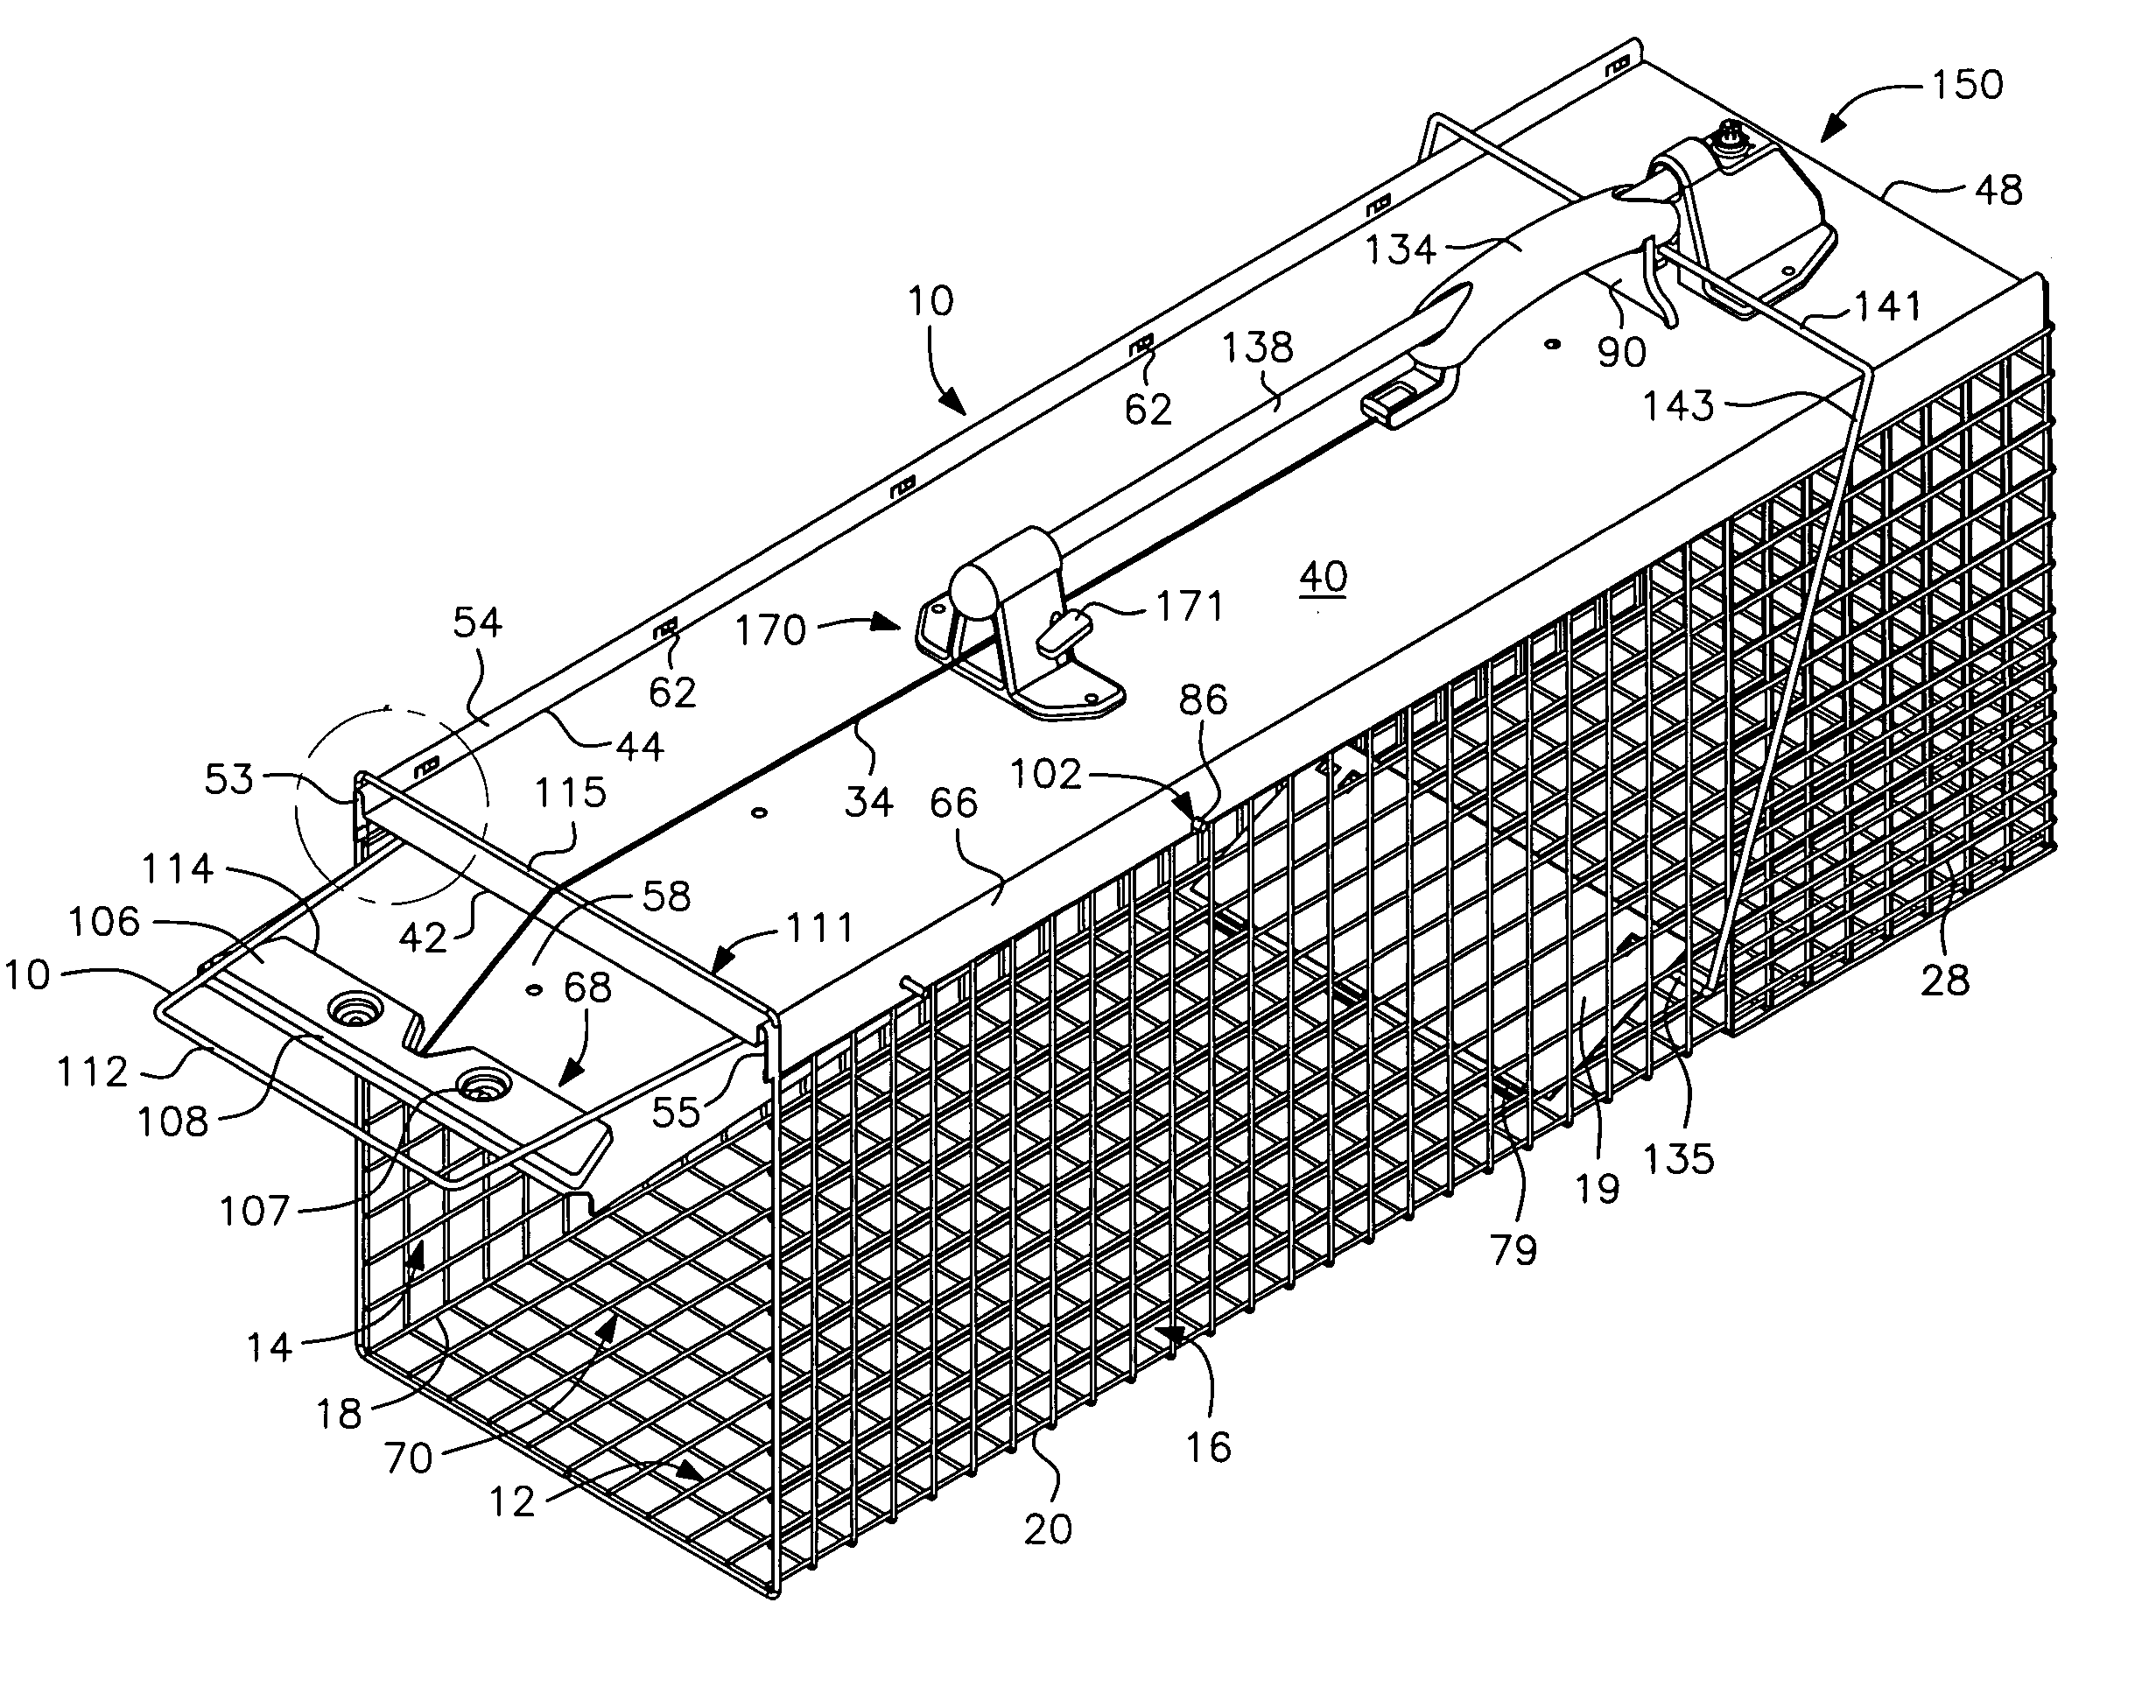 Cage trap with easy set and release mechanism